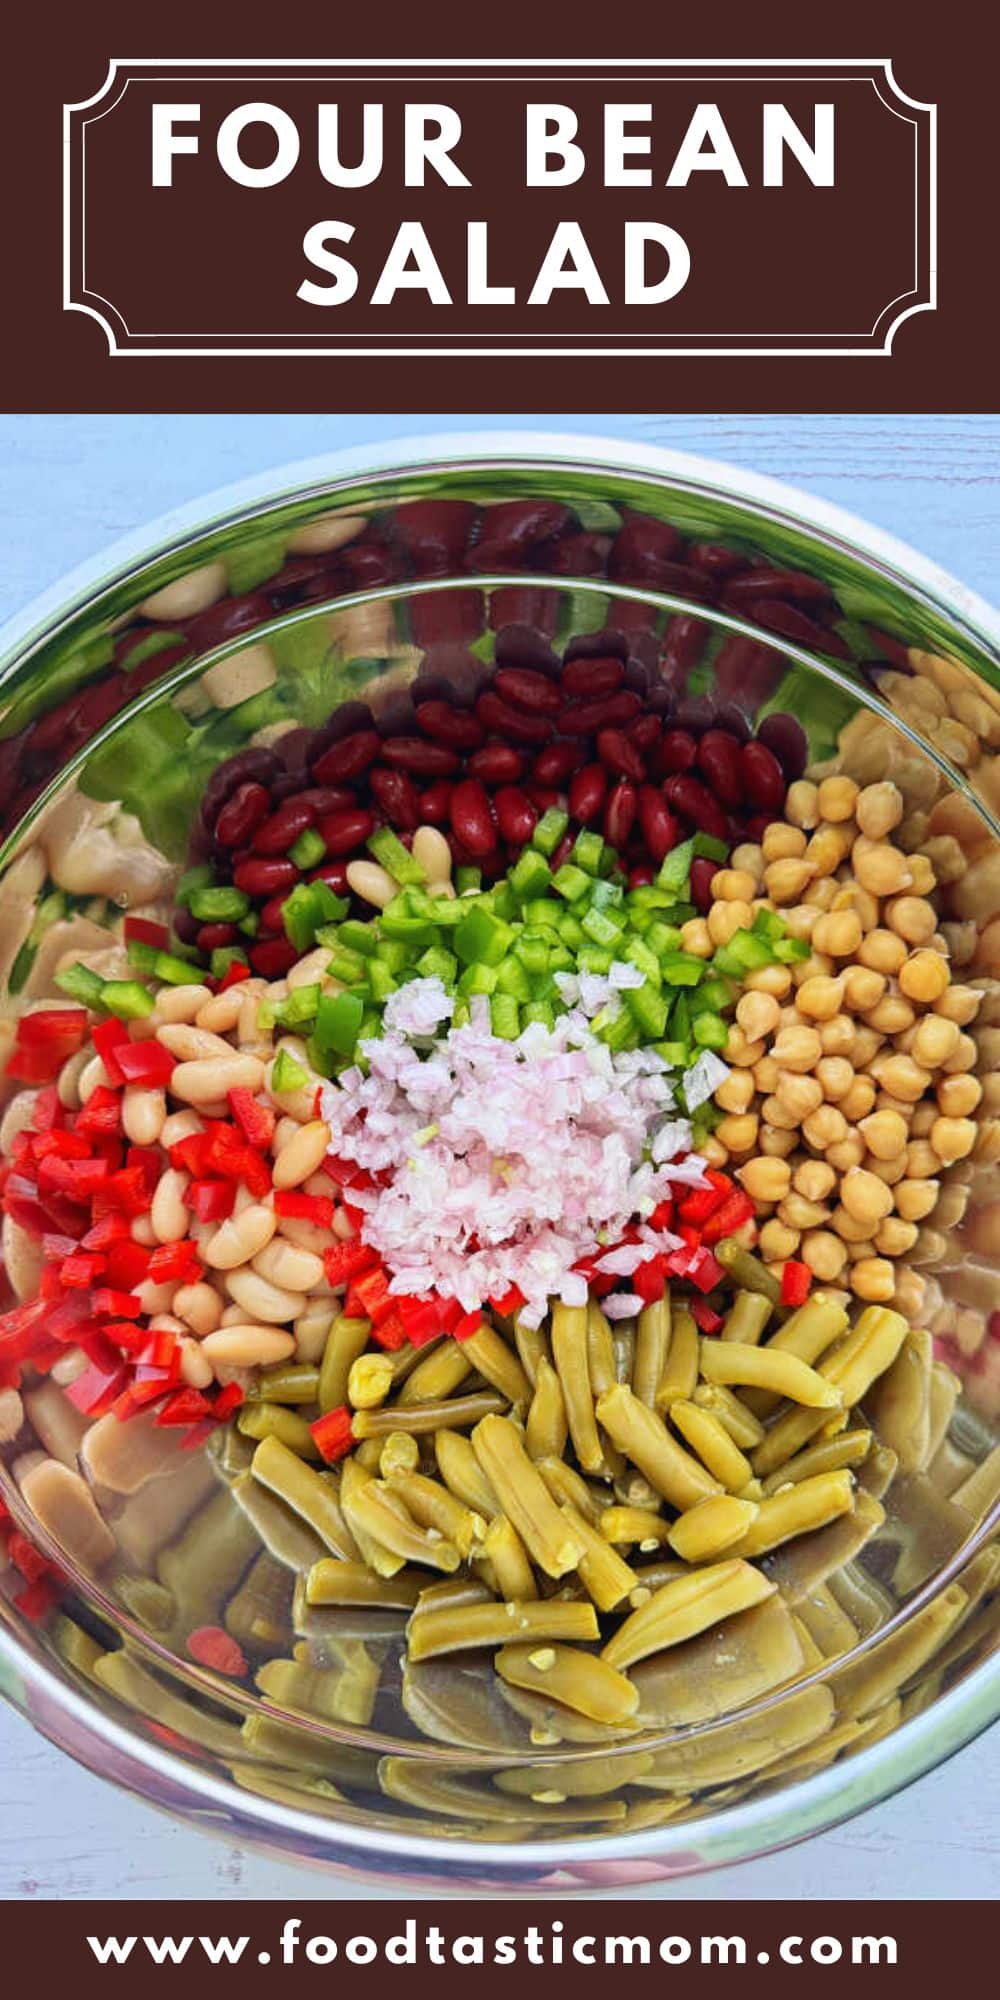 4 Bean Salad is a nutritious salad that can be made ahead. Economical, packed with protein and fiber, it's a perfect side dish for picnics and potlucks. via @foodtasticmom